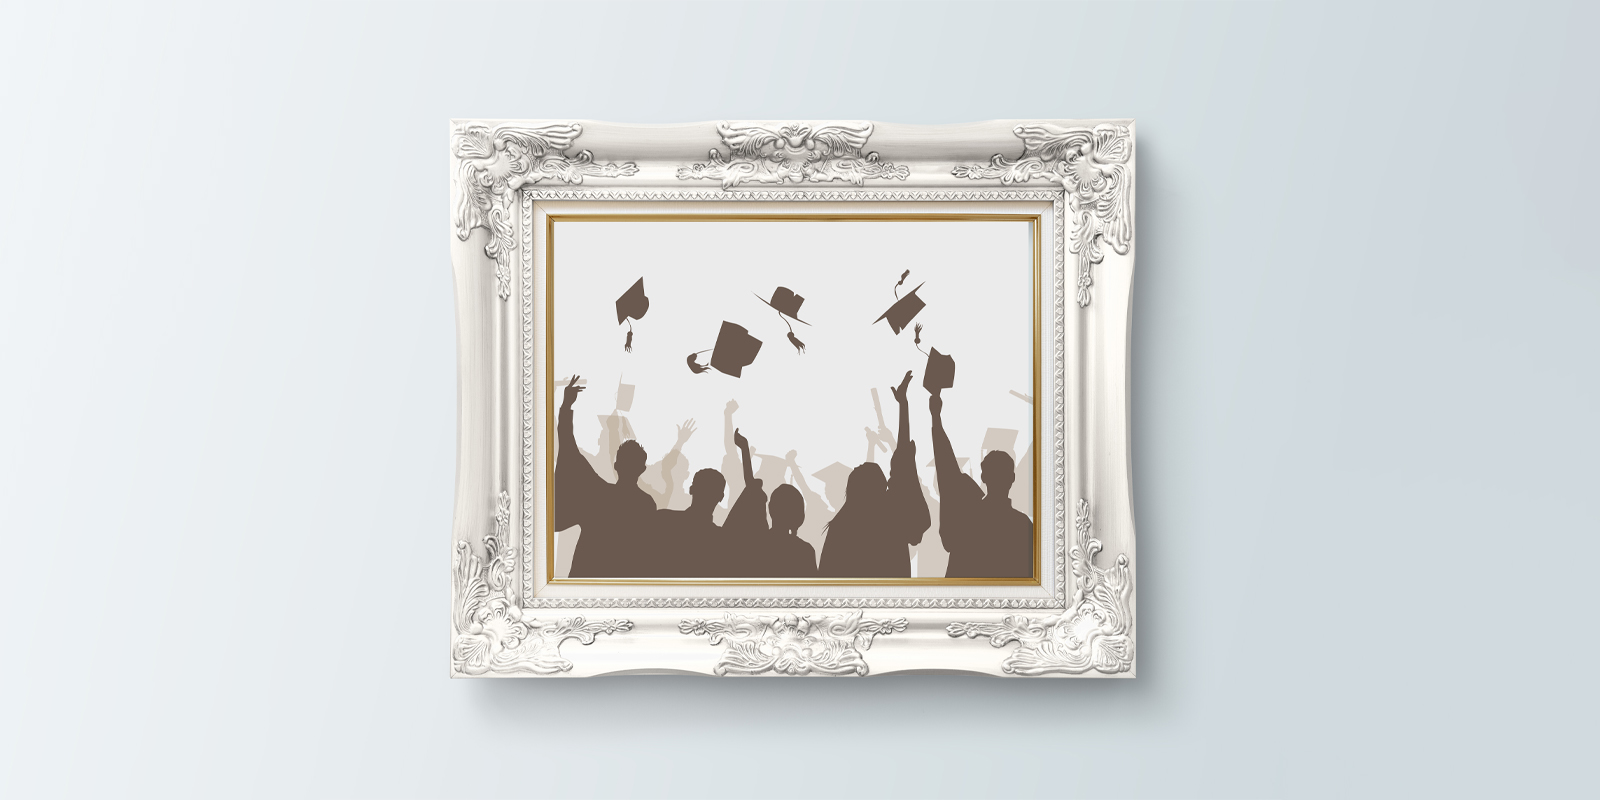 Graduation prints in Madrid - Print with Pagerr